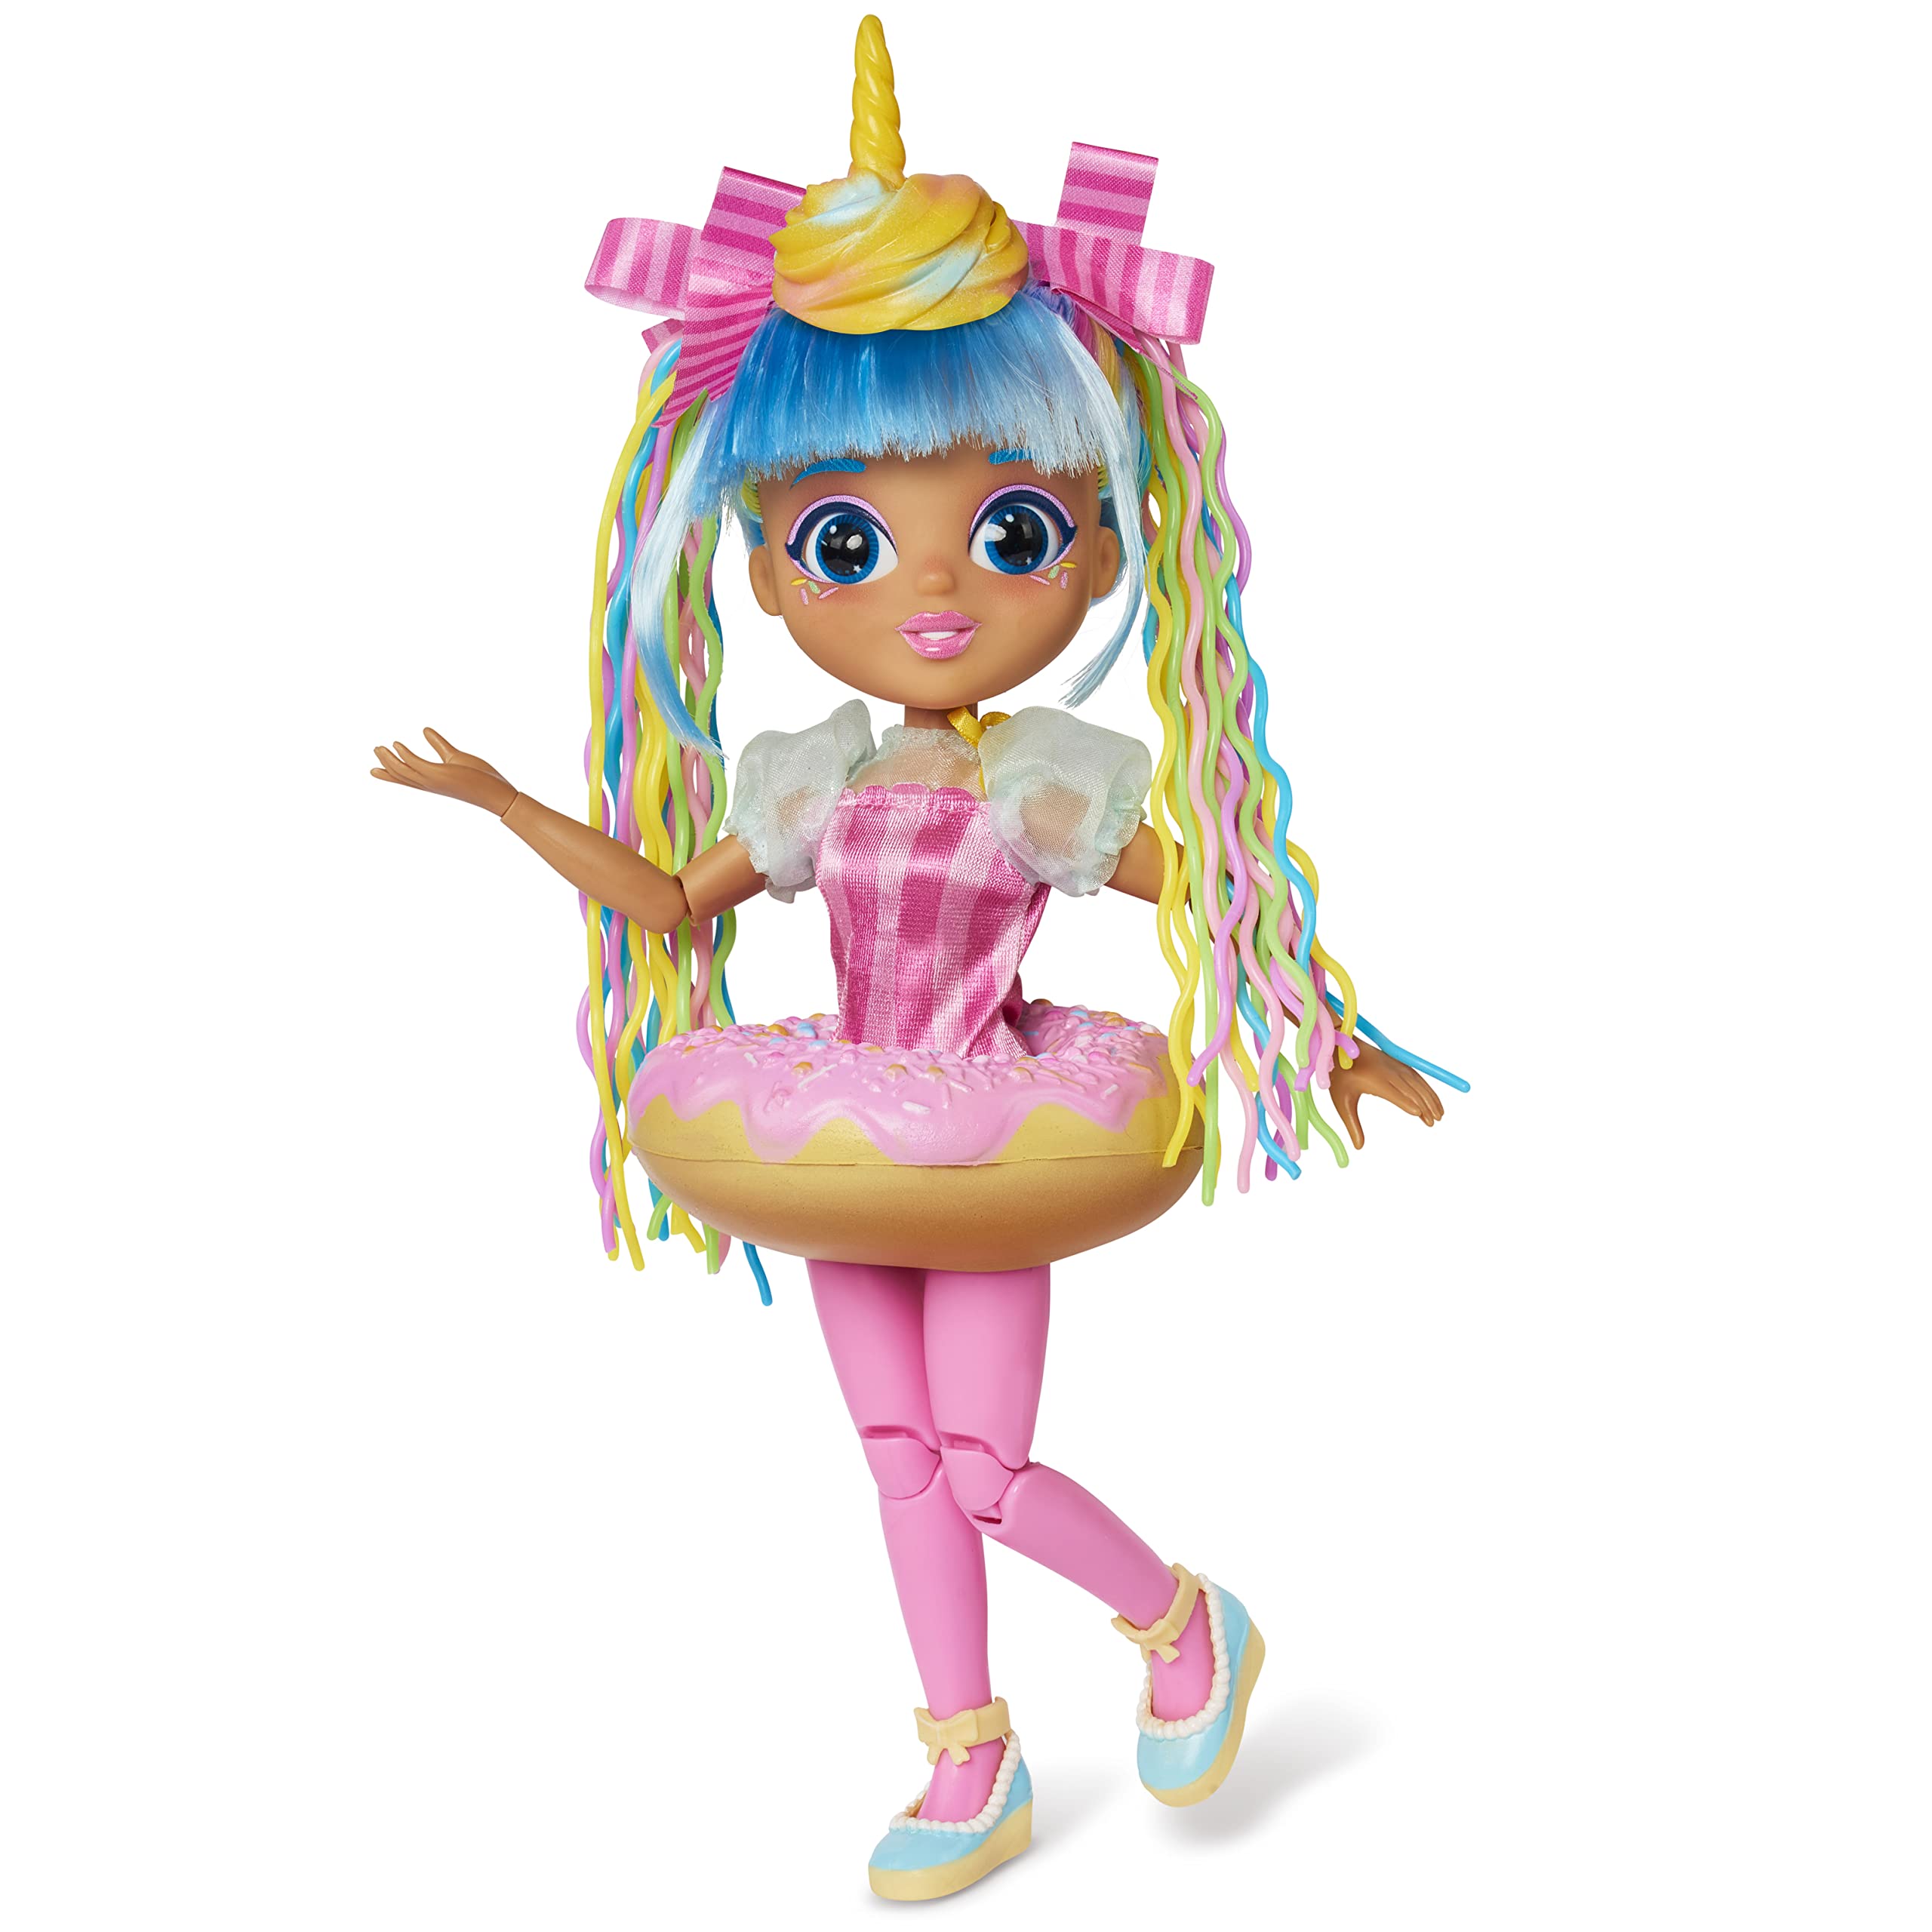 Sunny Days Entertainment Fidgie Friends Unicorn Sprinkles – Stretchy Noodle Hair with Slow Foam Donut Skirt | 10.5 Inch Fashion Doll with Fidgets | Sensory Toys for Kids